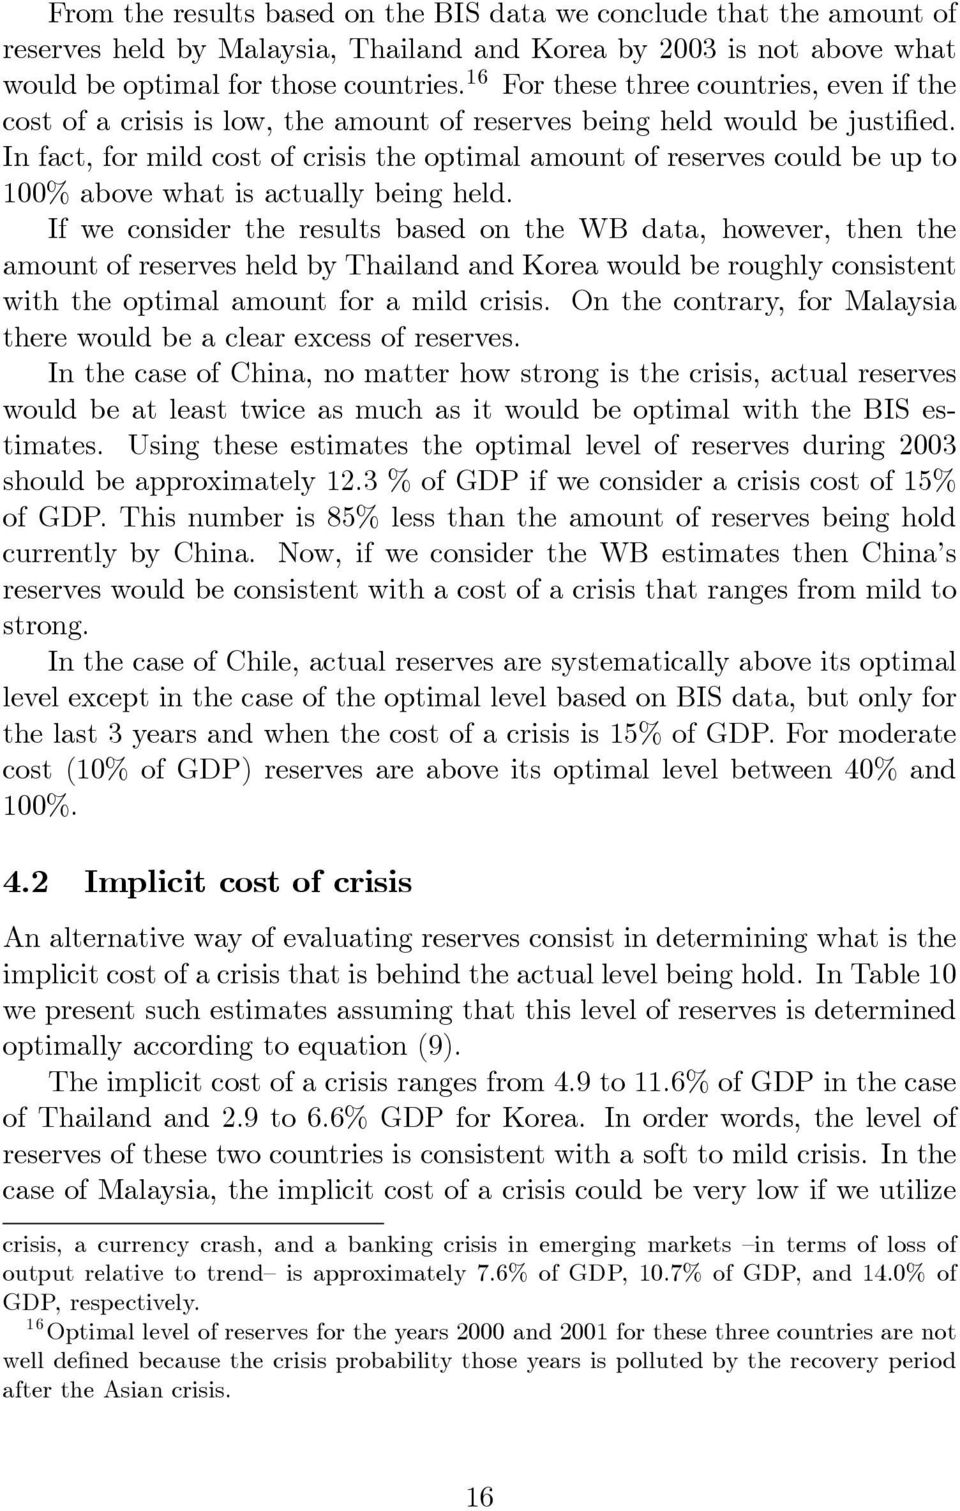 In fact, for mild cost of crisis the optimal amount of reserves could be up to 100% above what is actually being held.